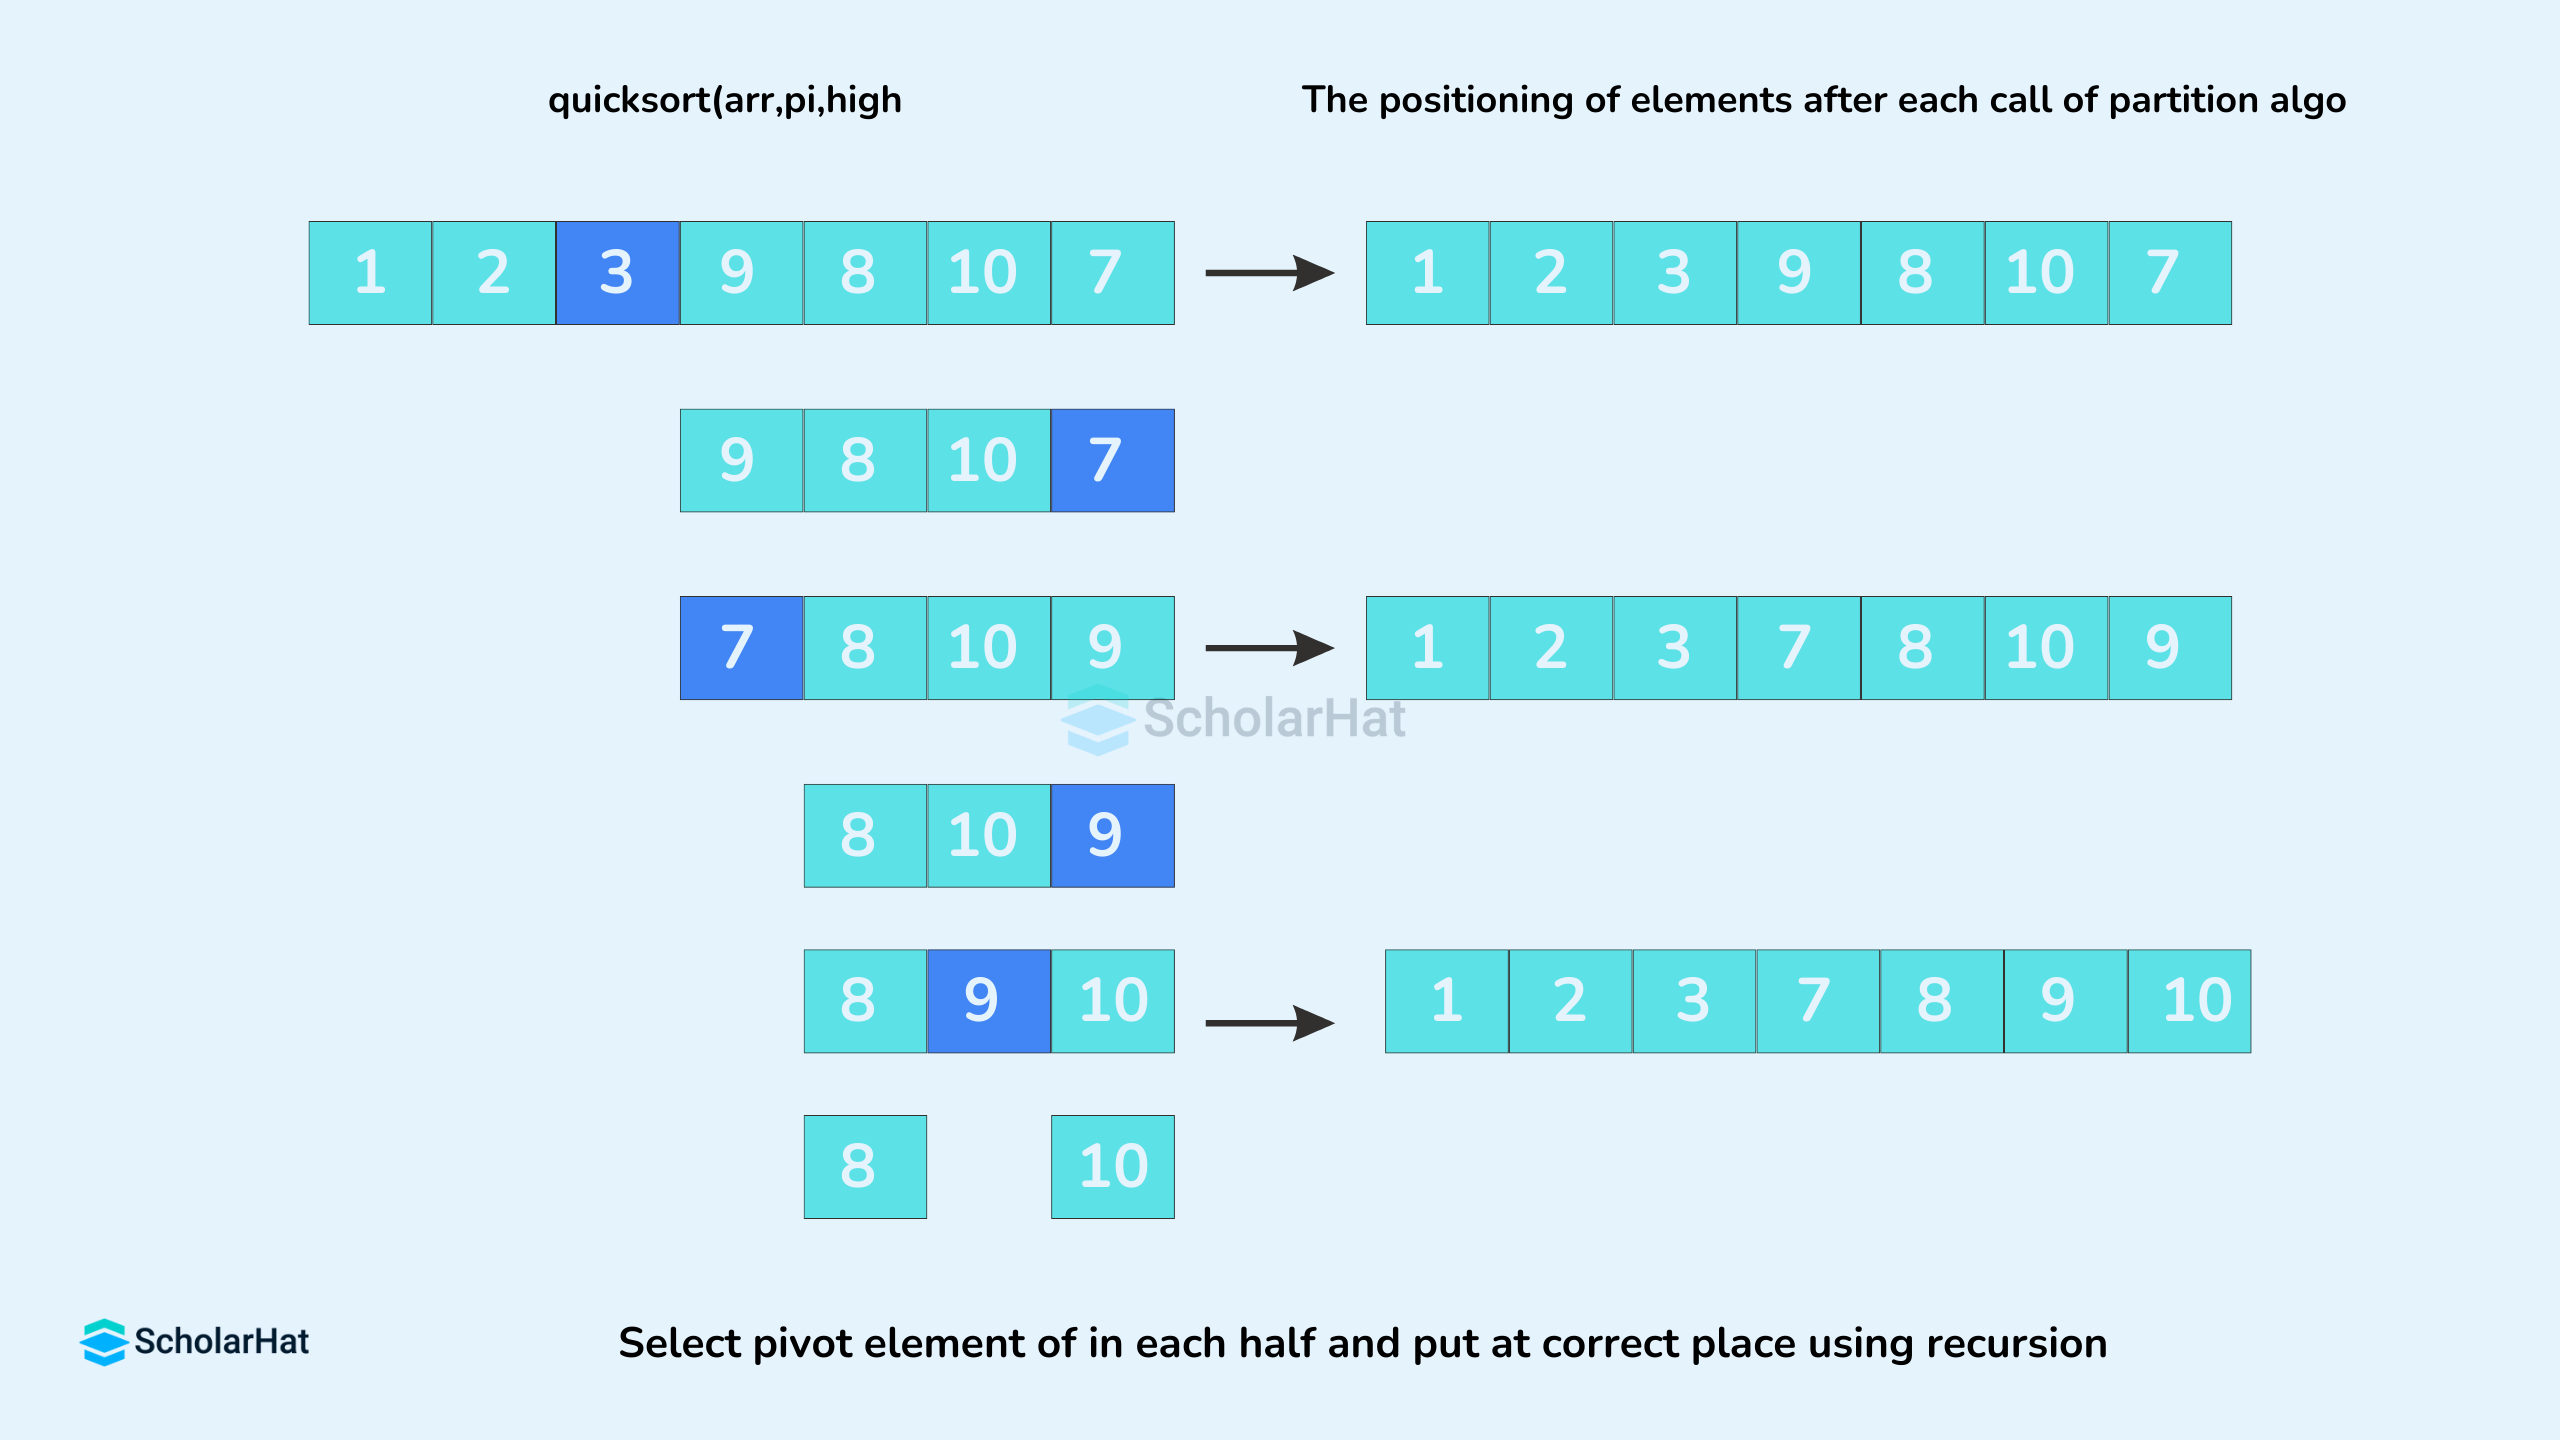 Select pivot element of in each half and put at correct place using recursion